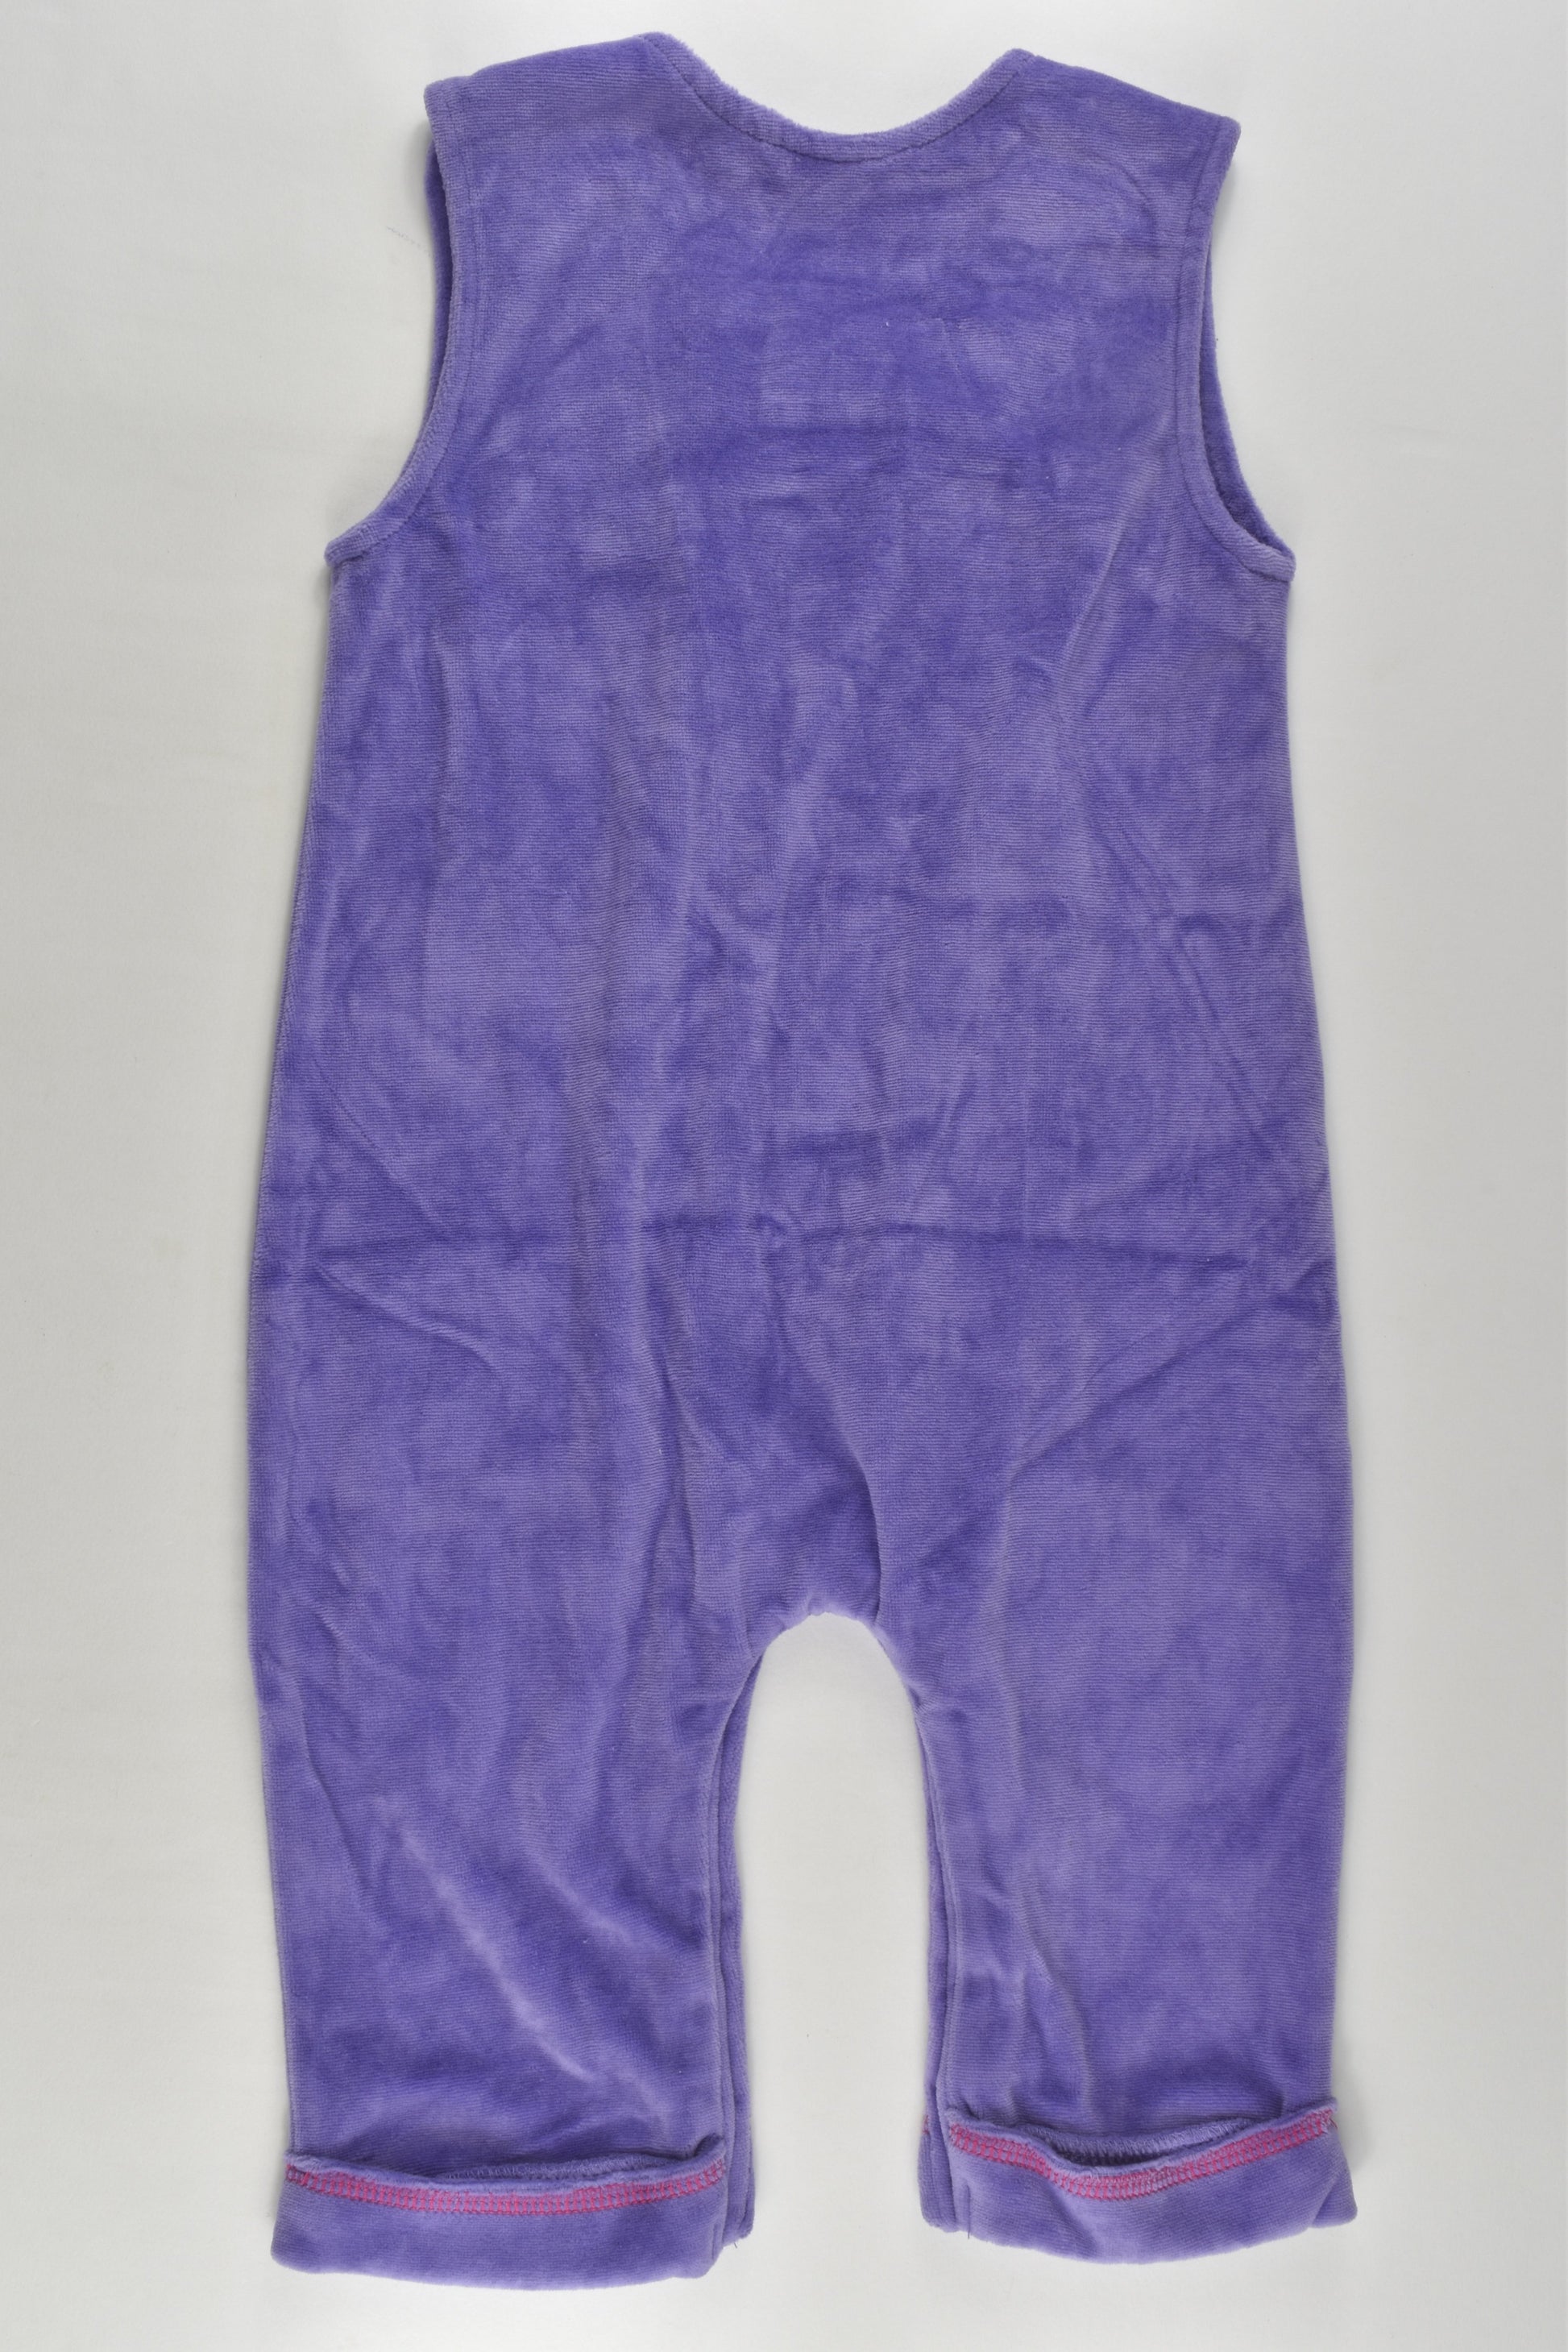 Coles Baby Size 0 Velour Bunny Overalls